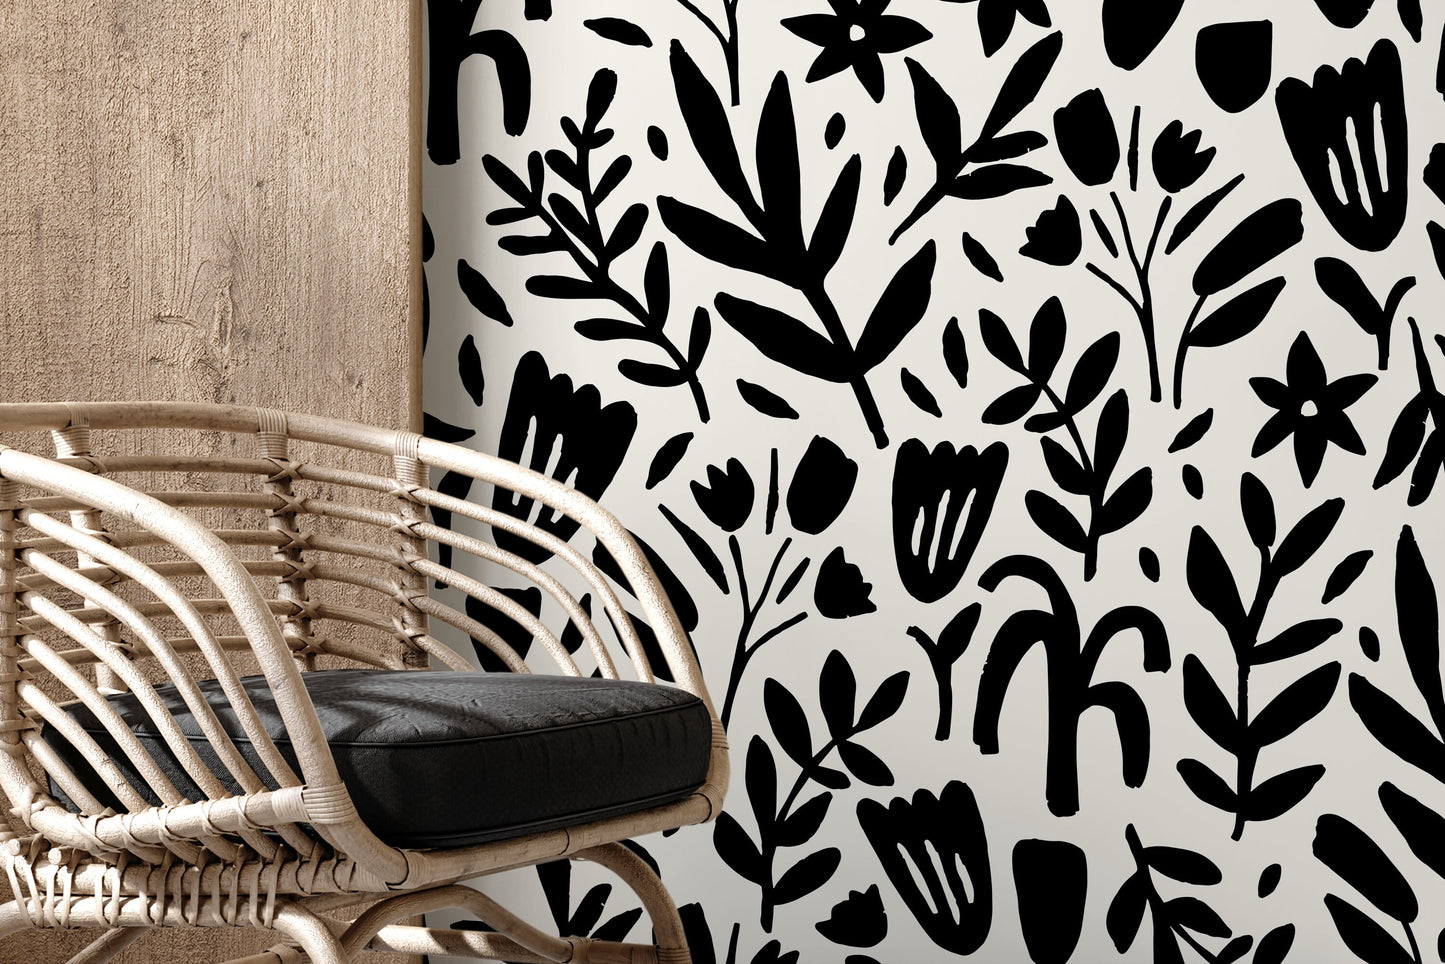 Black and White Floral Wallpaper / Peel and Stick Wallpaper Removable Wallpaper Home Decor Wall Art Wall Decor Room Decor - D370